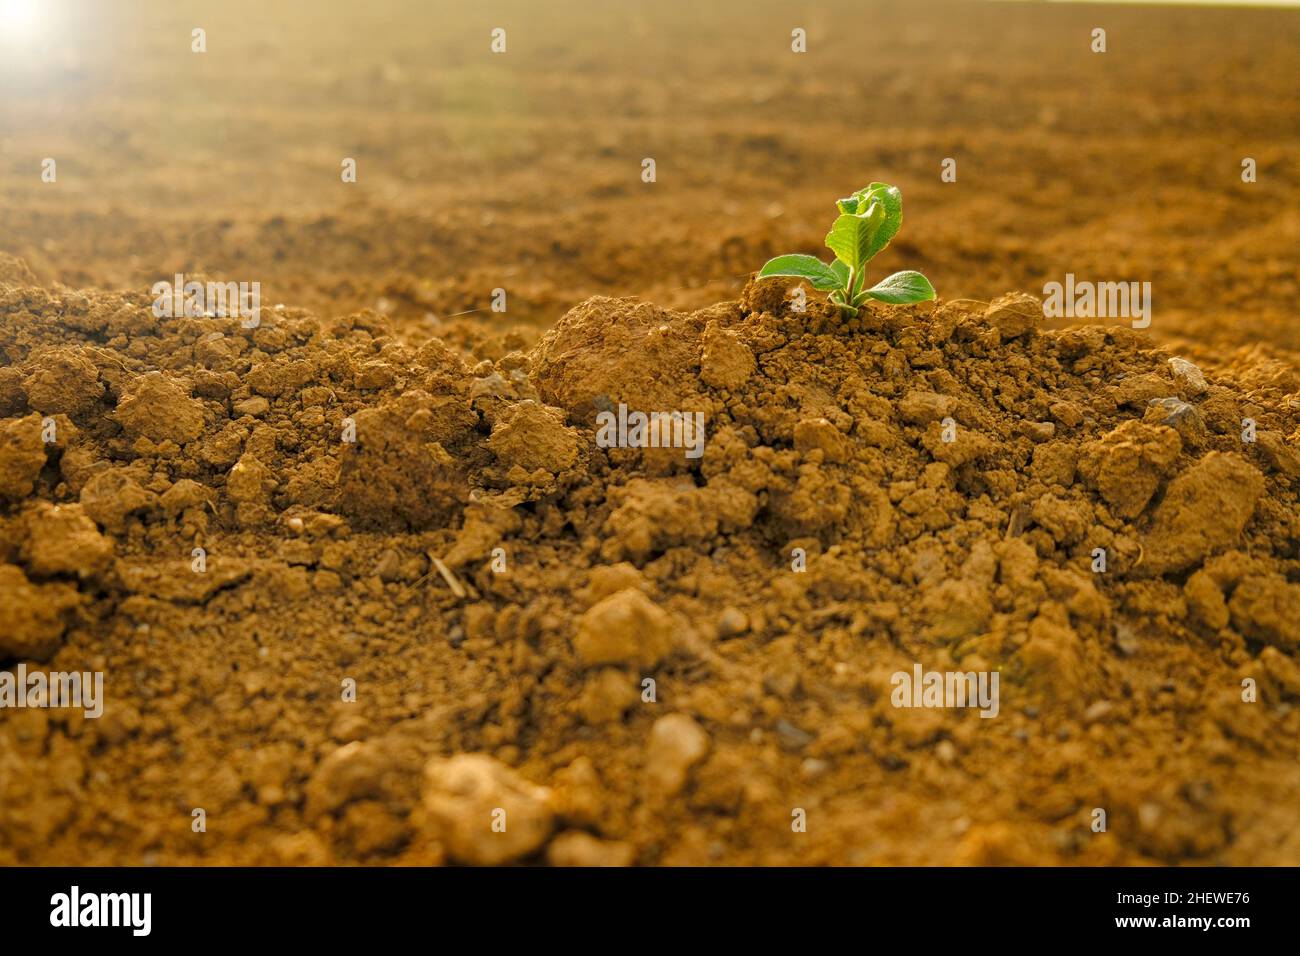 Green sprout in dry cracked soil.Green seedling in the ground in field.New life. Agriculture and farming. seedling cultivation.  Stock Photo